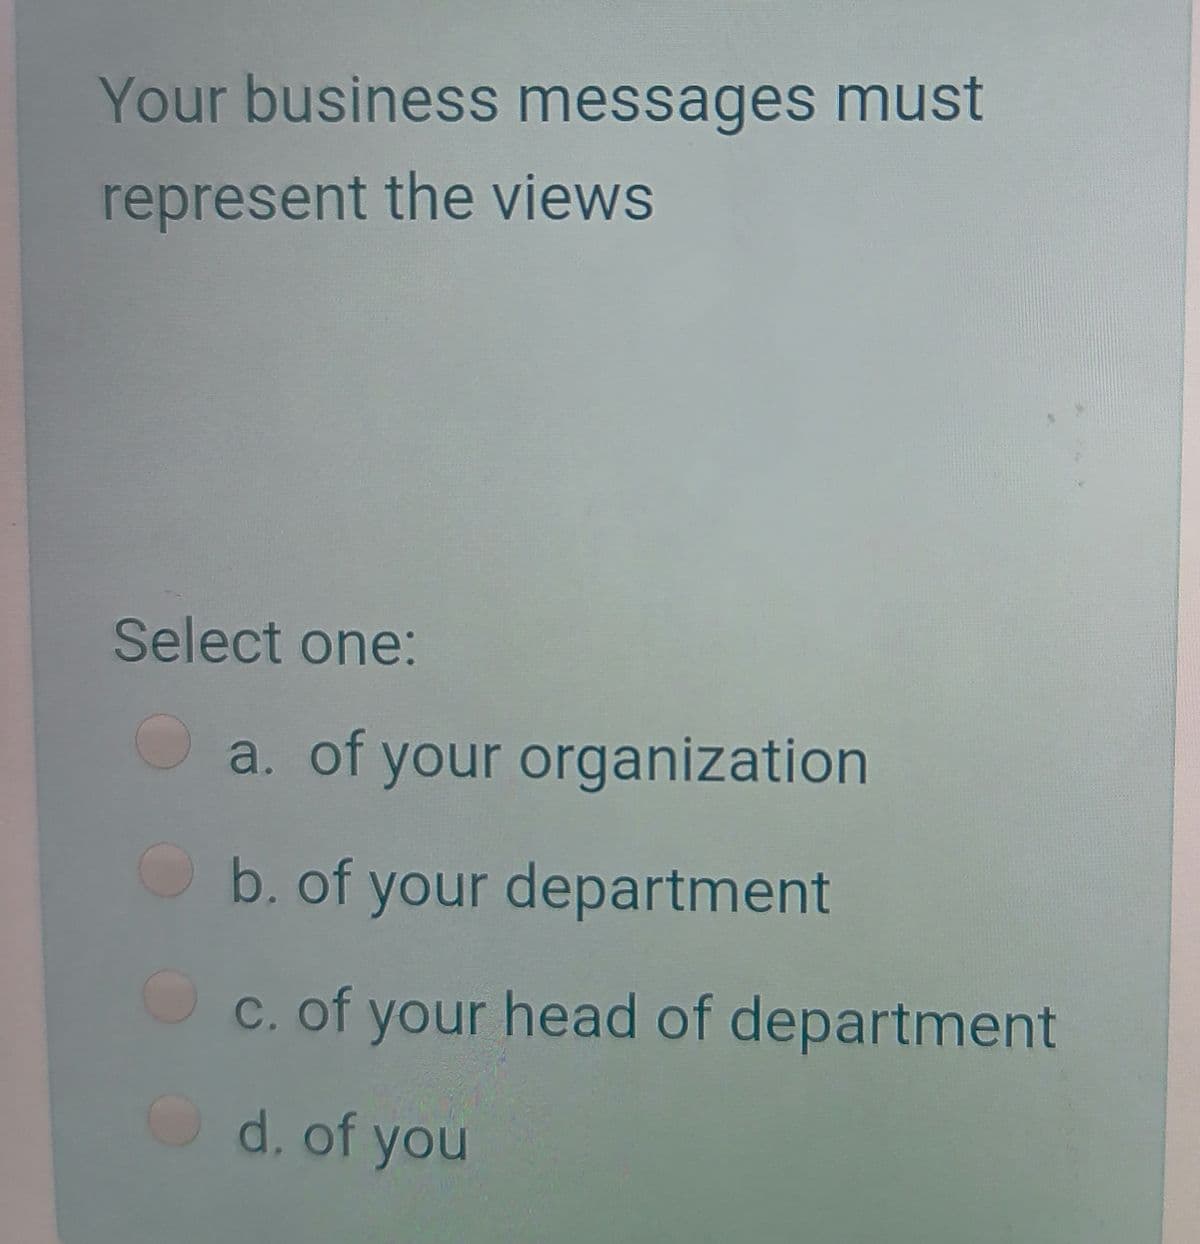 Your business messages must
represent the views
Select one:
a. of your organization
Ob. of your department
c. of your head of department
d. of you
